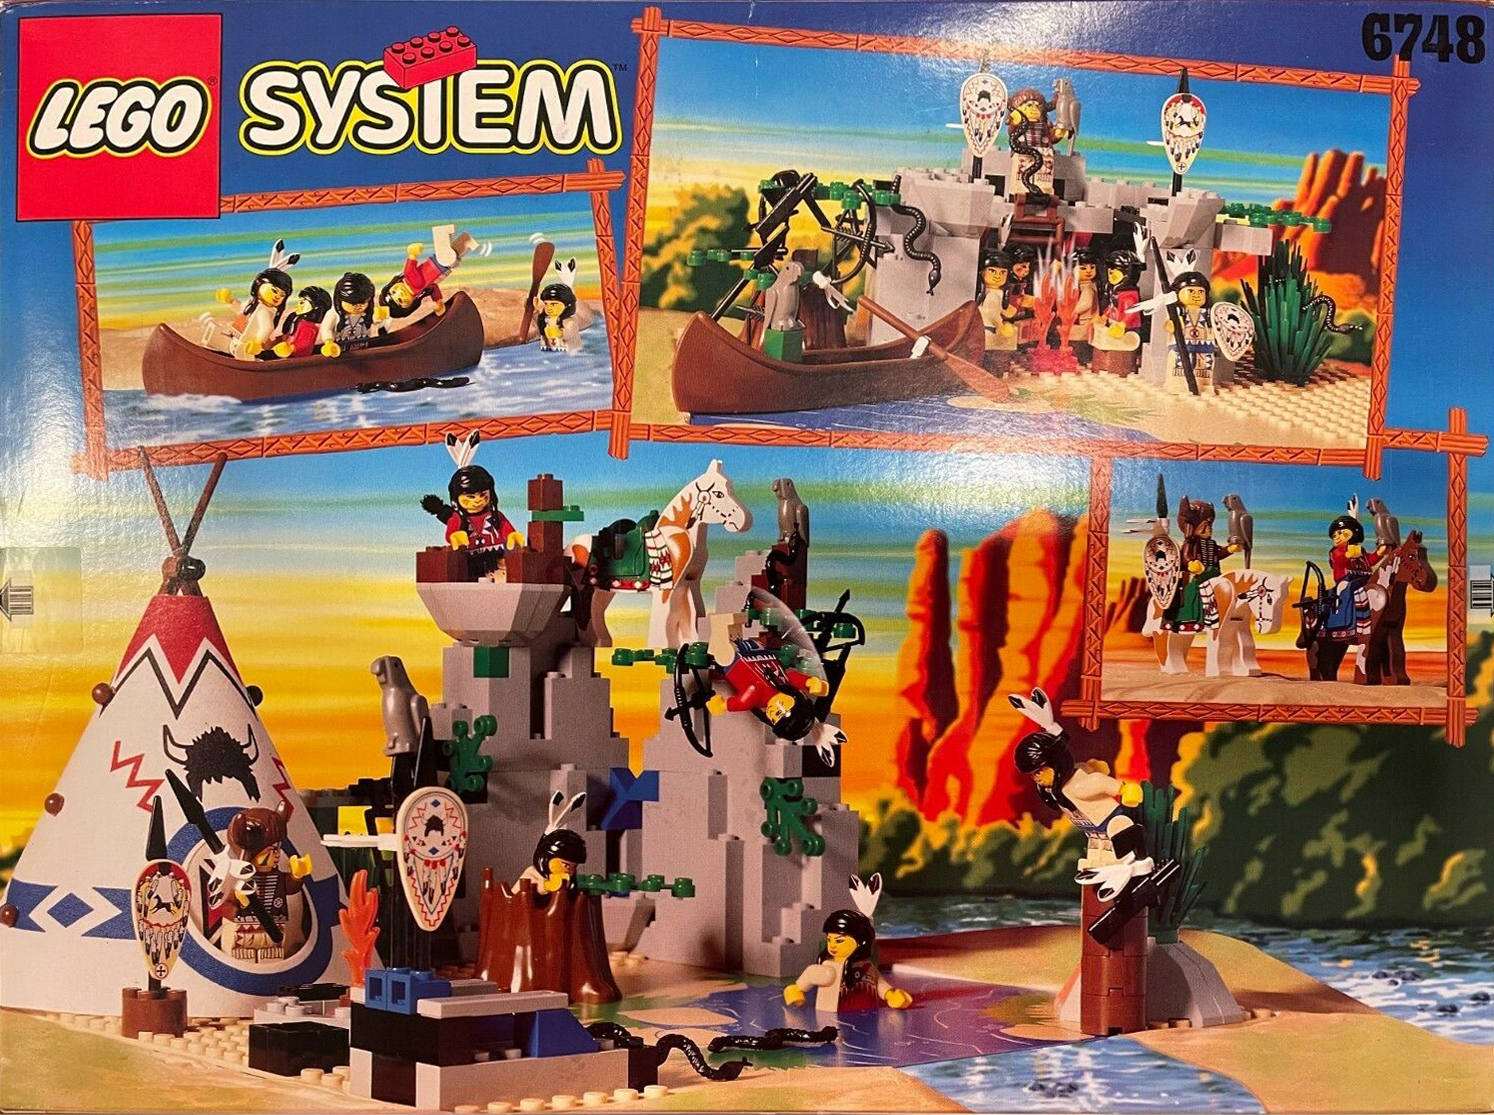 6748: Boulder Cliff Canyon - Back of the Box Builds